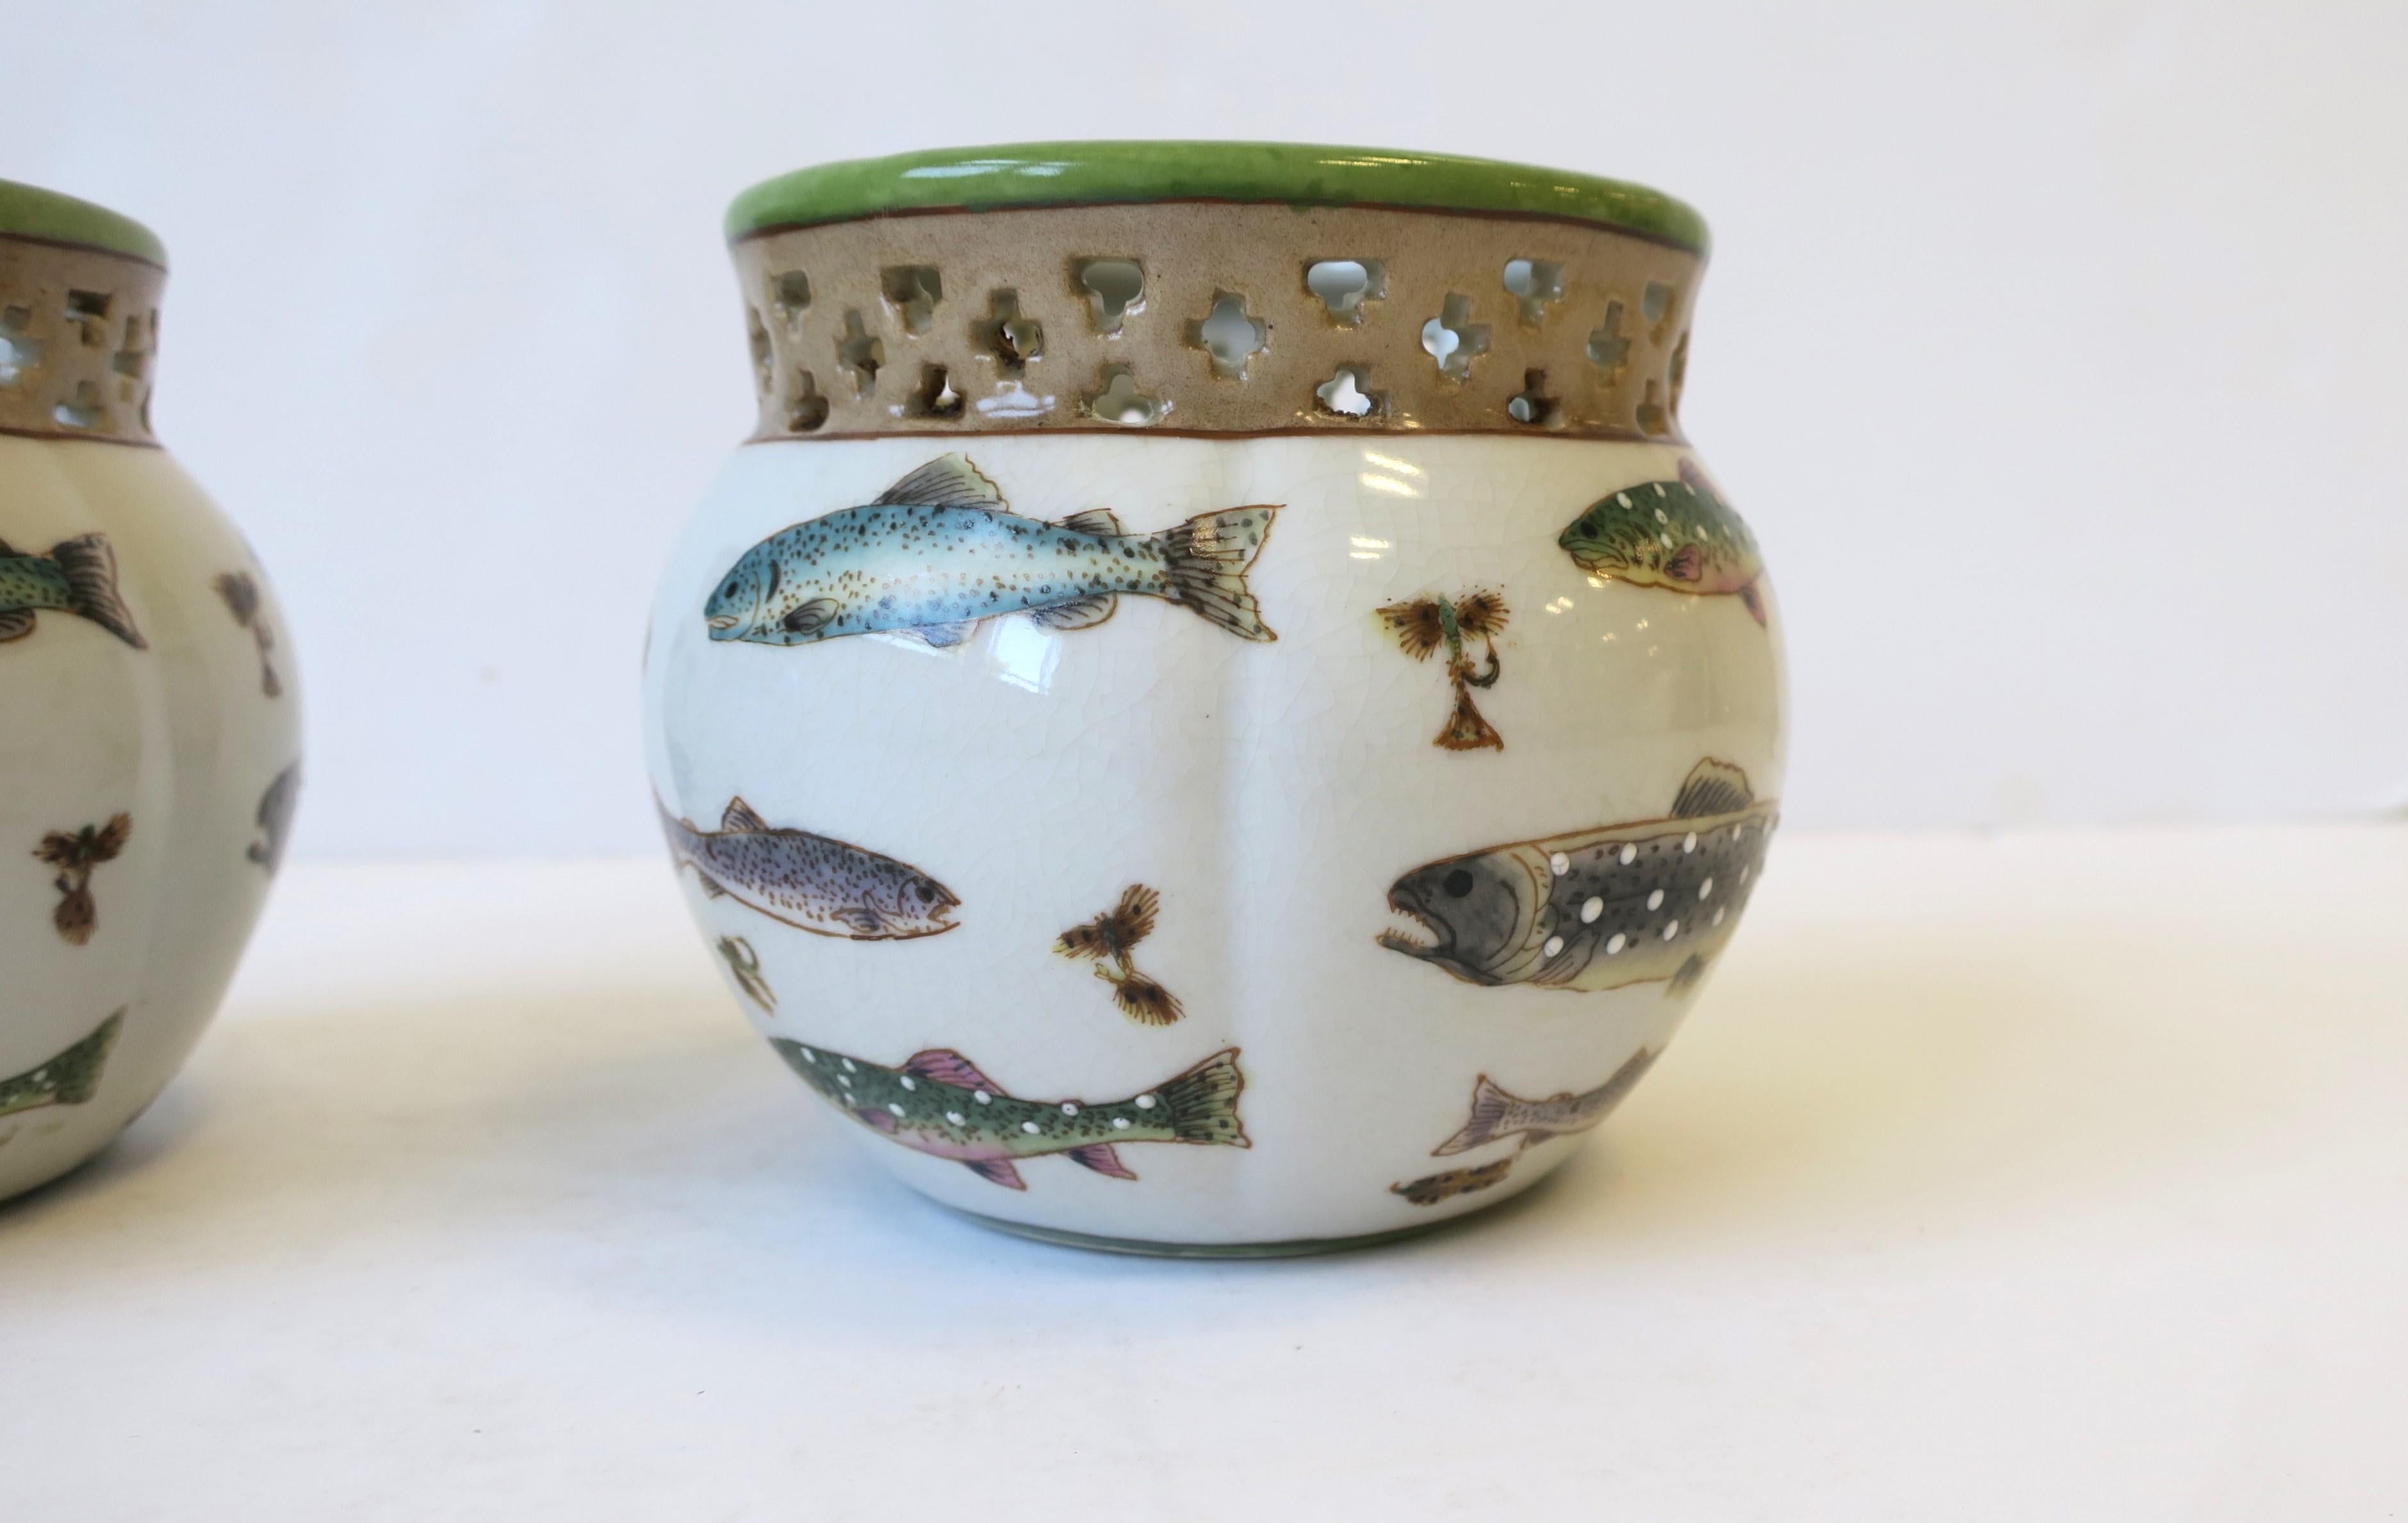 Fish and Lure Plant or Flower Pot Panters Ceramic Cachepots, Pair 1